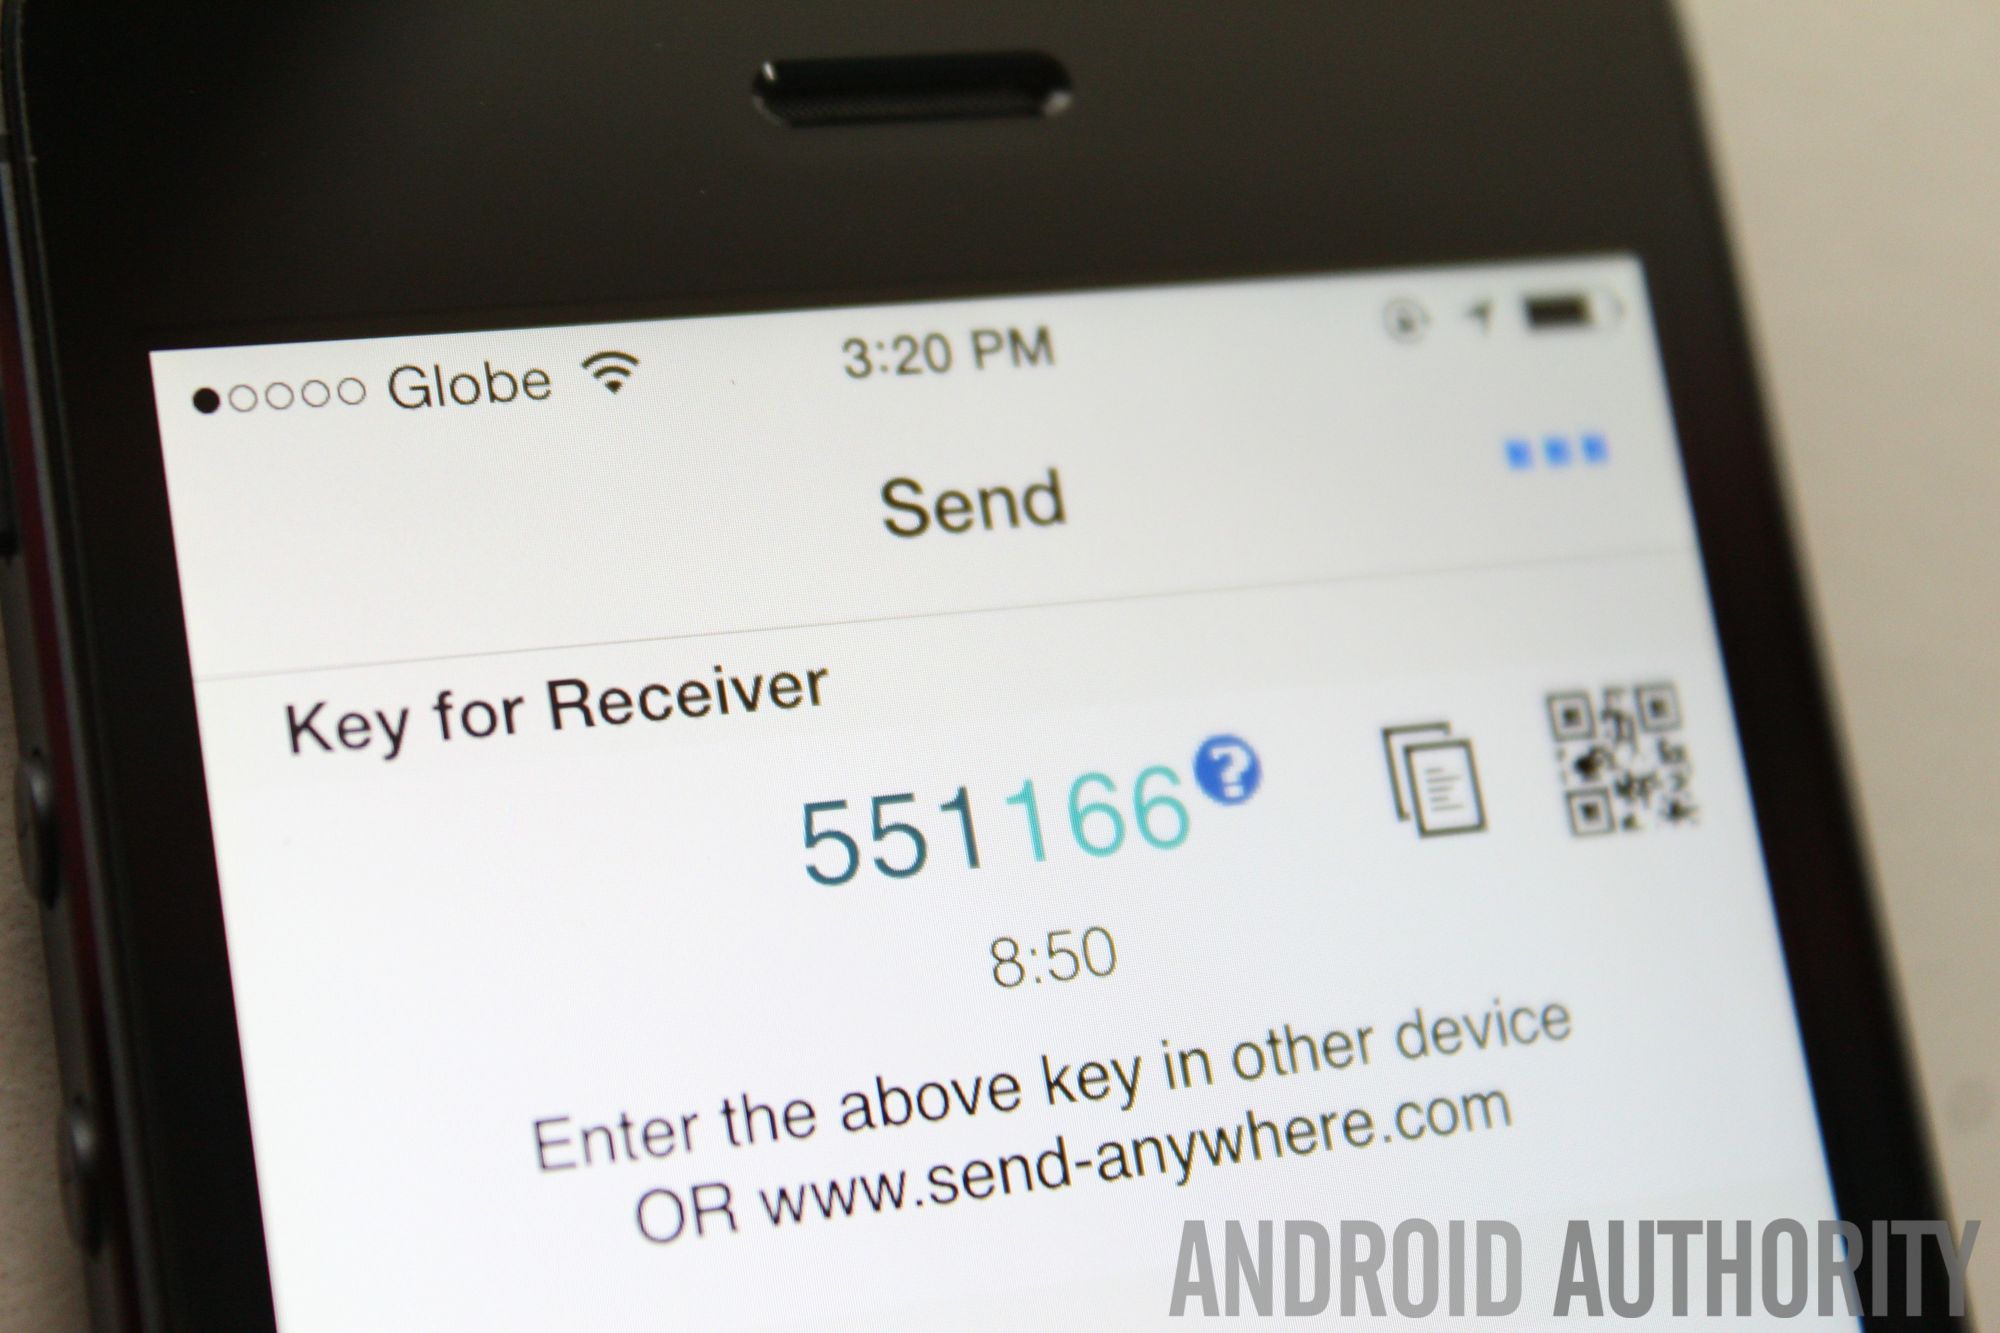 Transfer Files From Android To Iphone Via Bluetooth